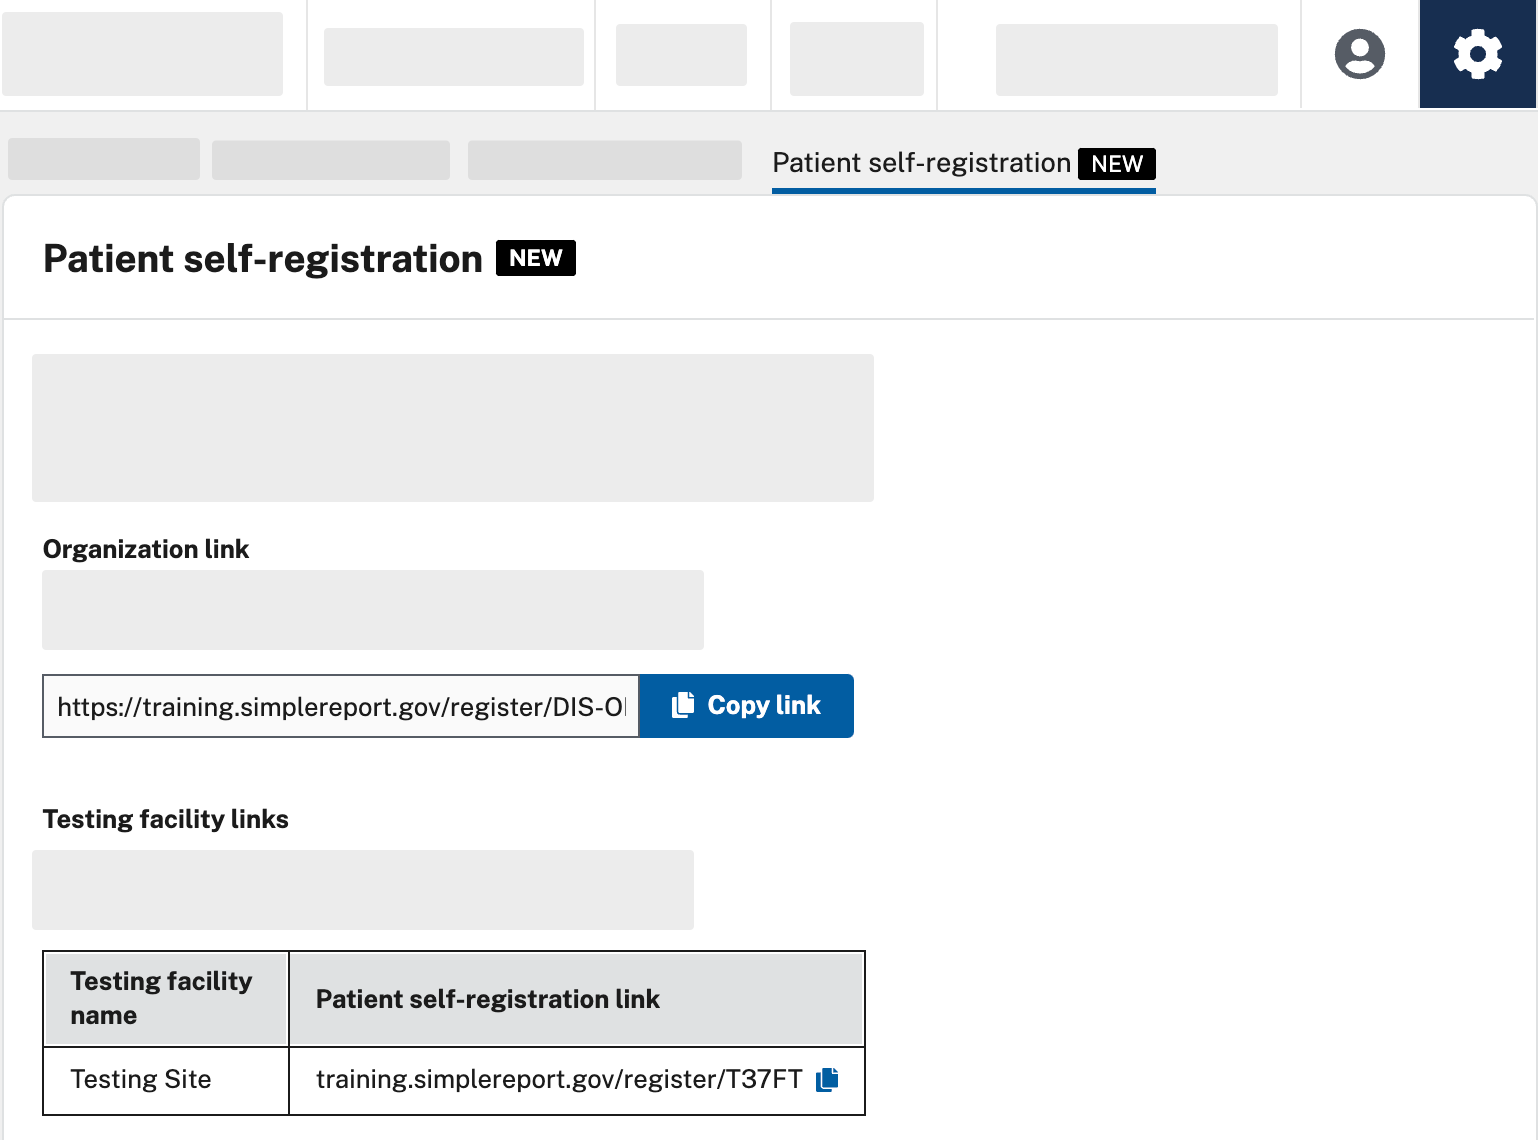 The SimpleReport app with self-registration page shown